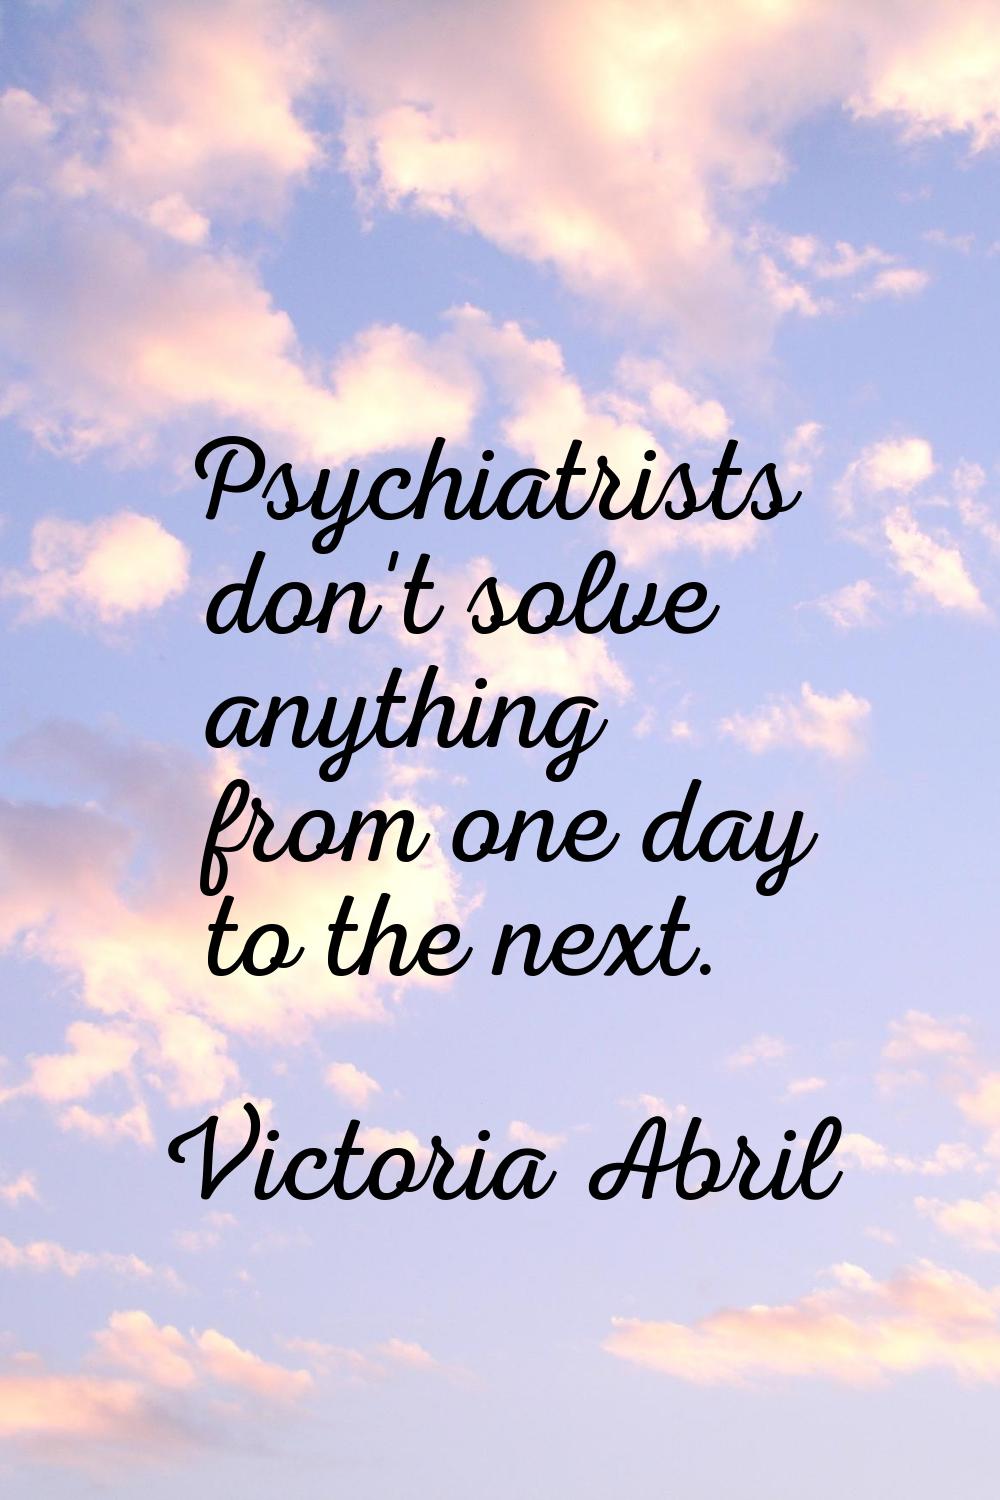 Psychiatrists don't solve anything from one day to the next.